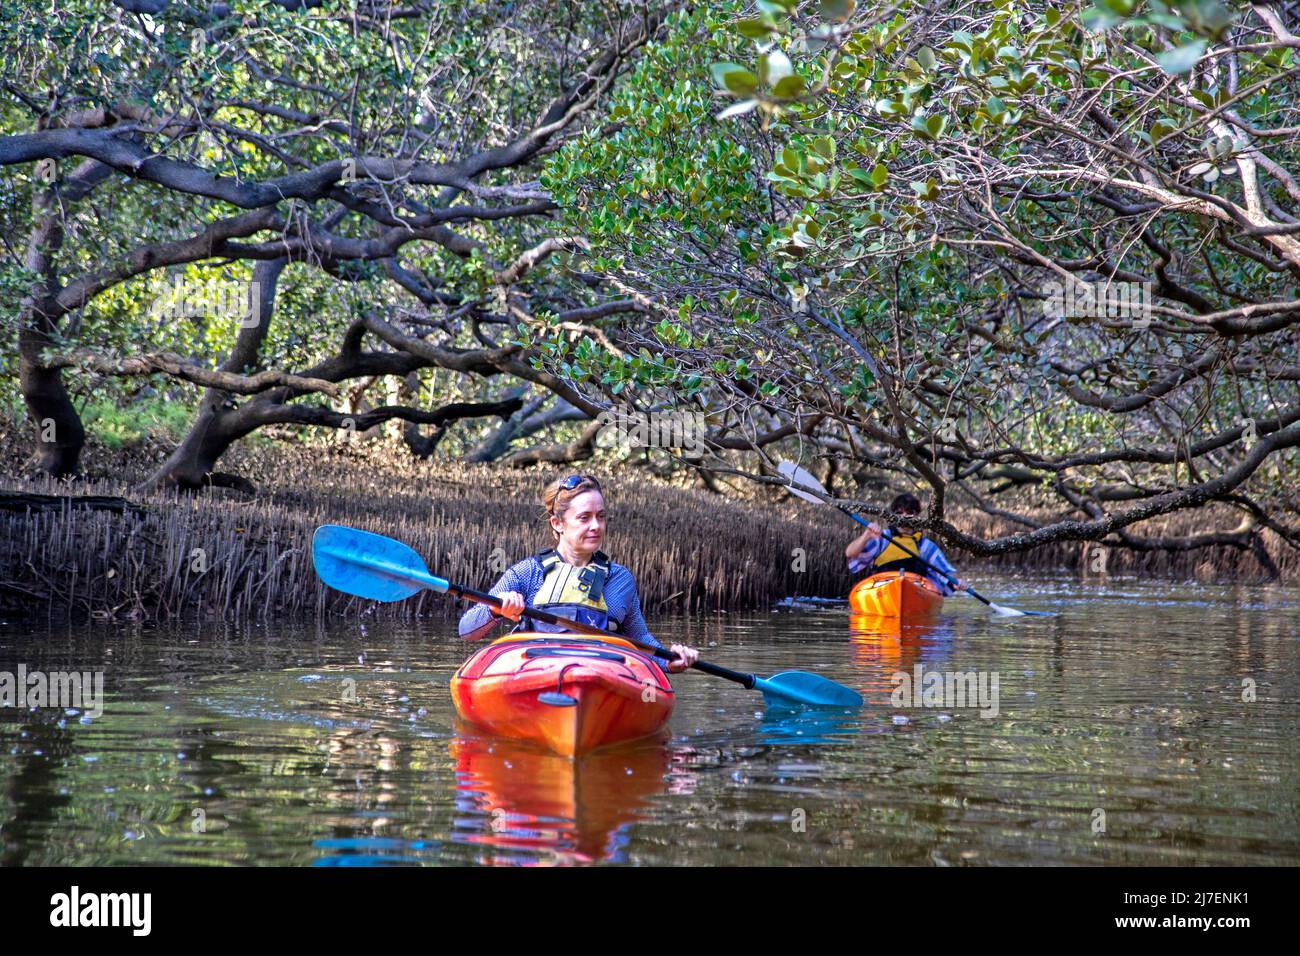 Kayaking through mangroves in the Adelaide Dolphin Sanctuary along the Port River Stock Photo